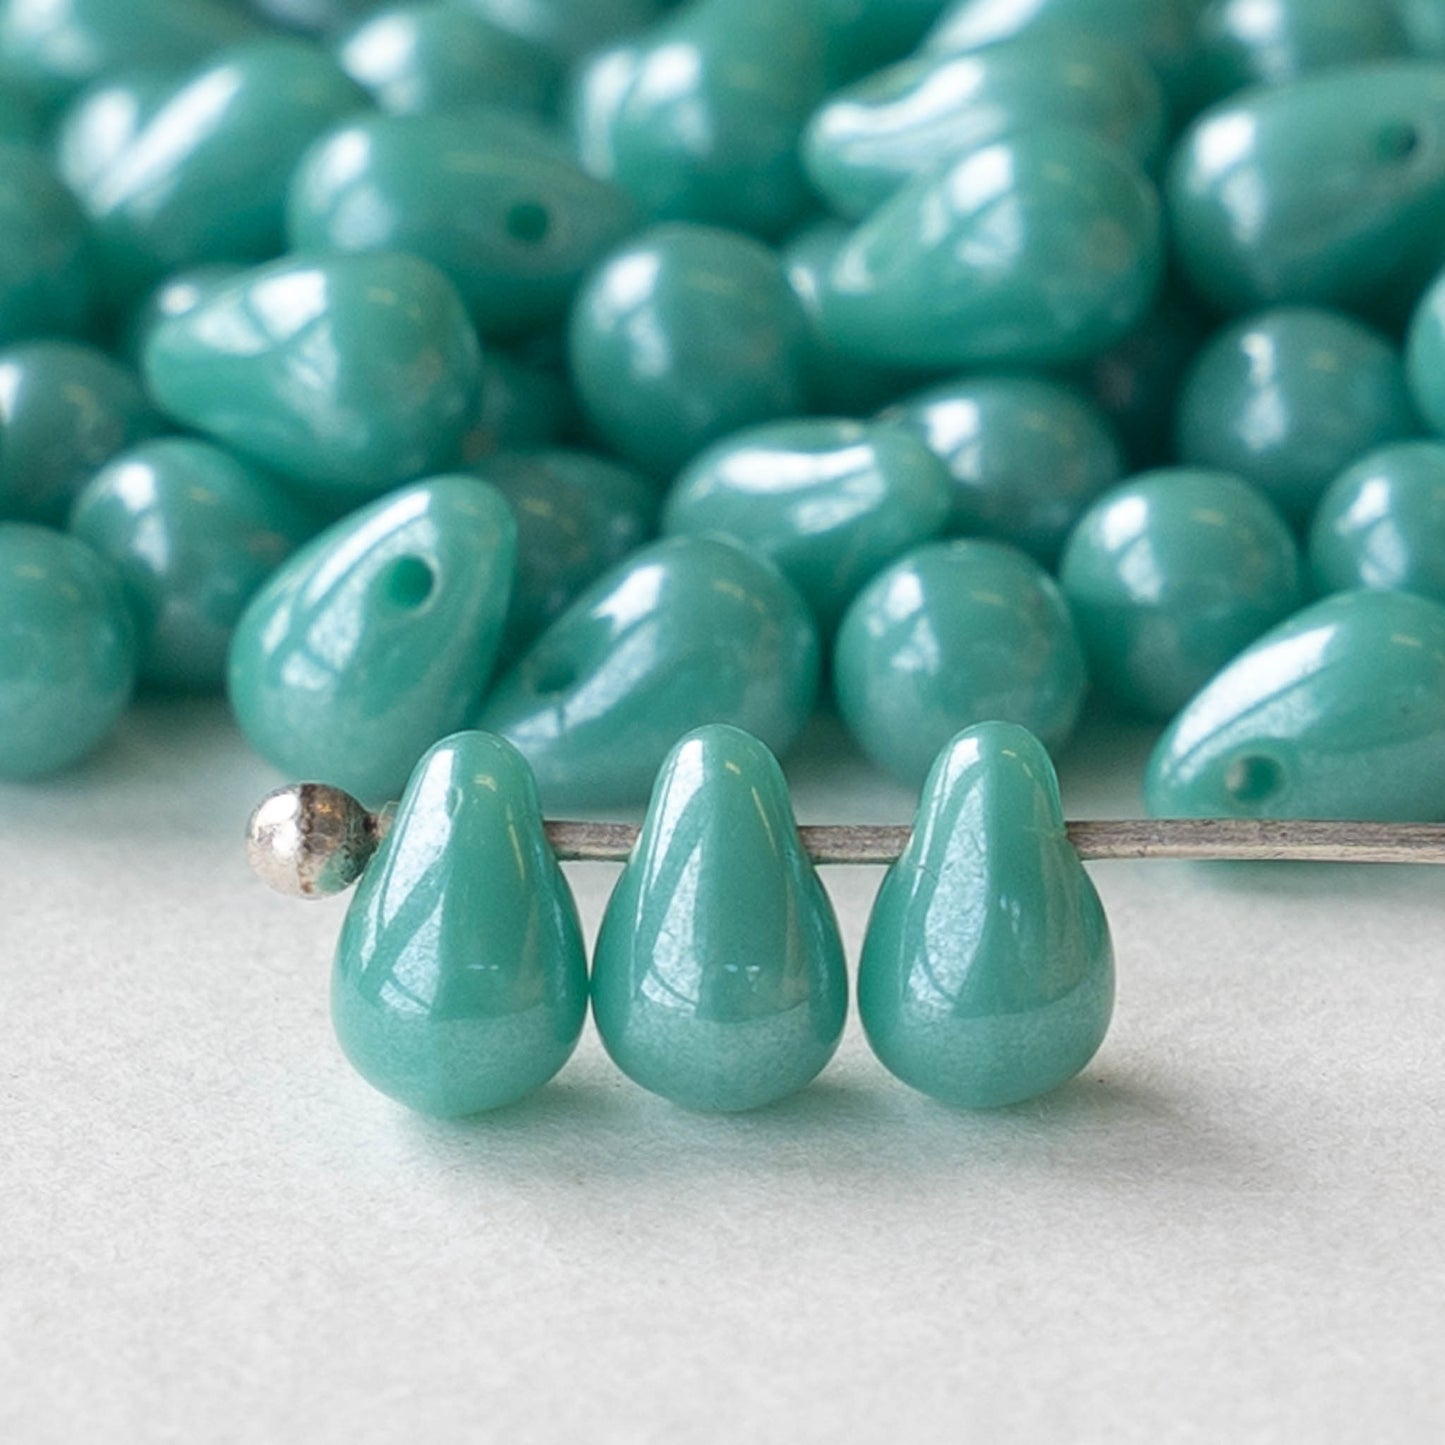 4x6mm Glass Teardrop Beads - Opaque Turquoise Luster - 100 Beads